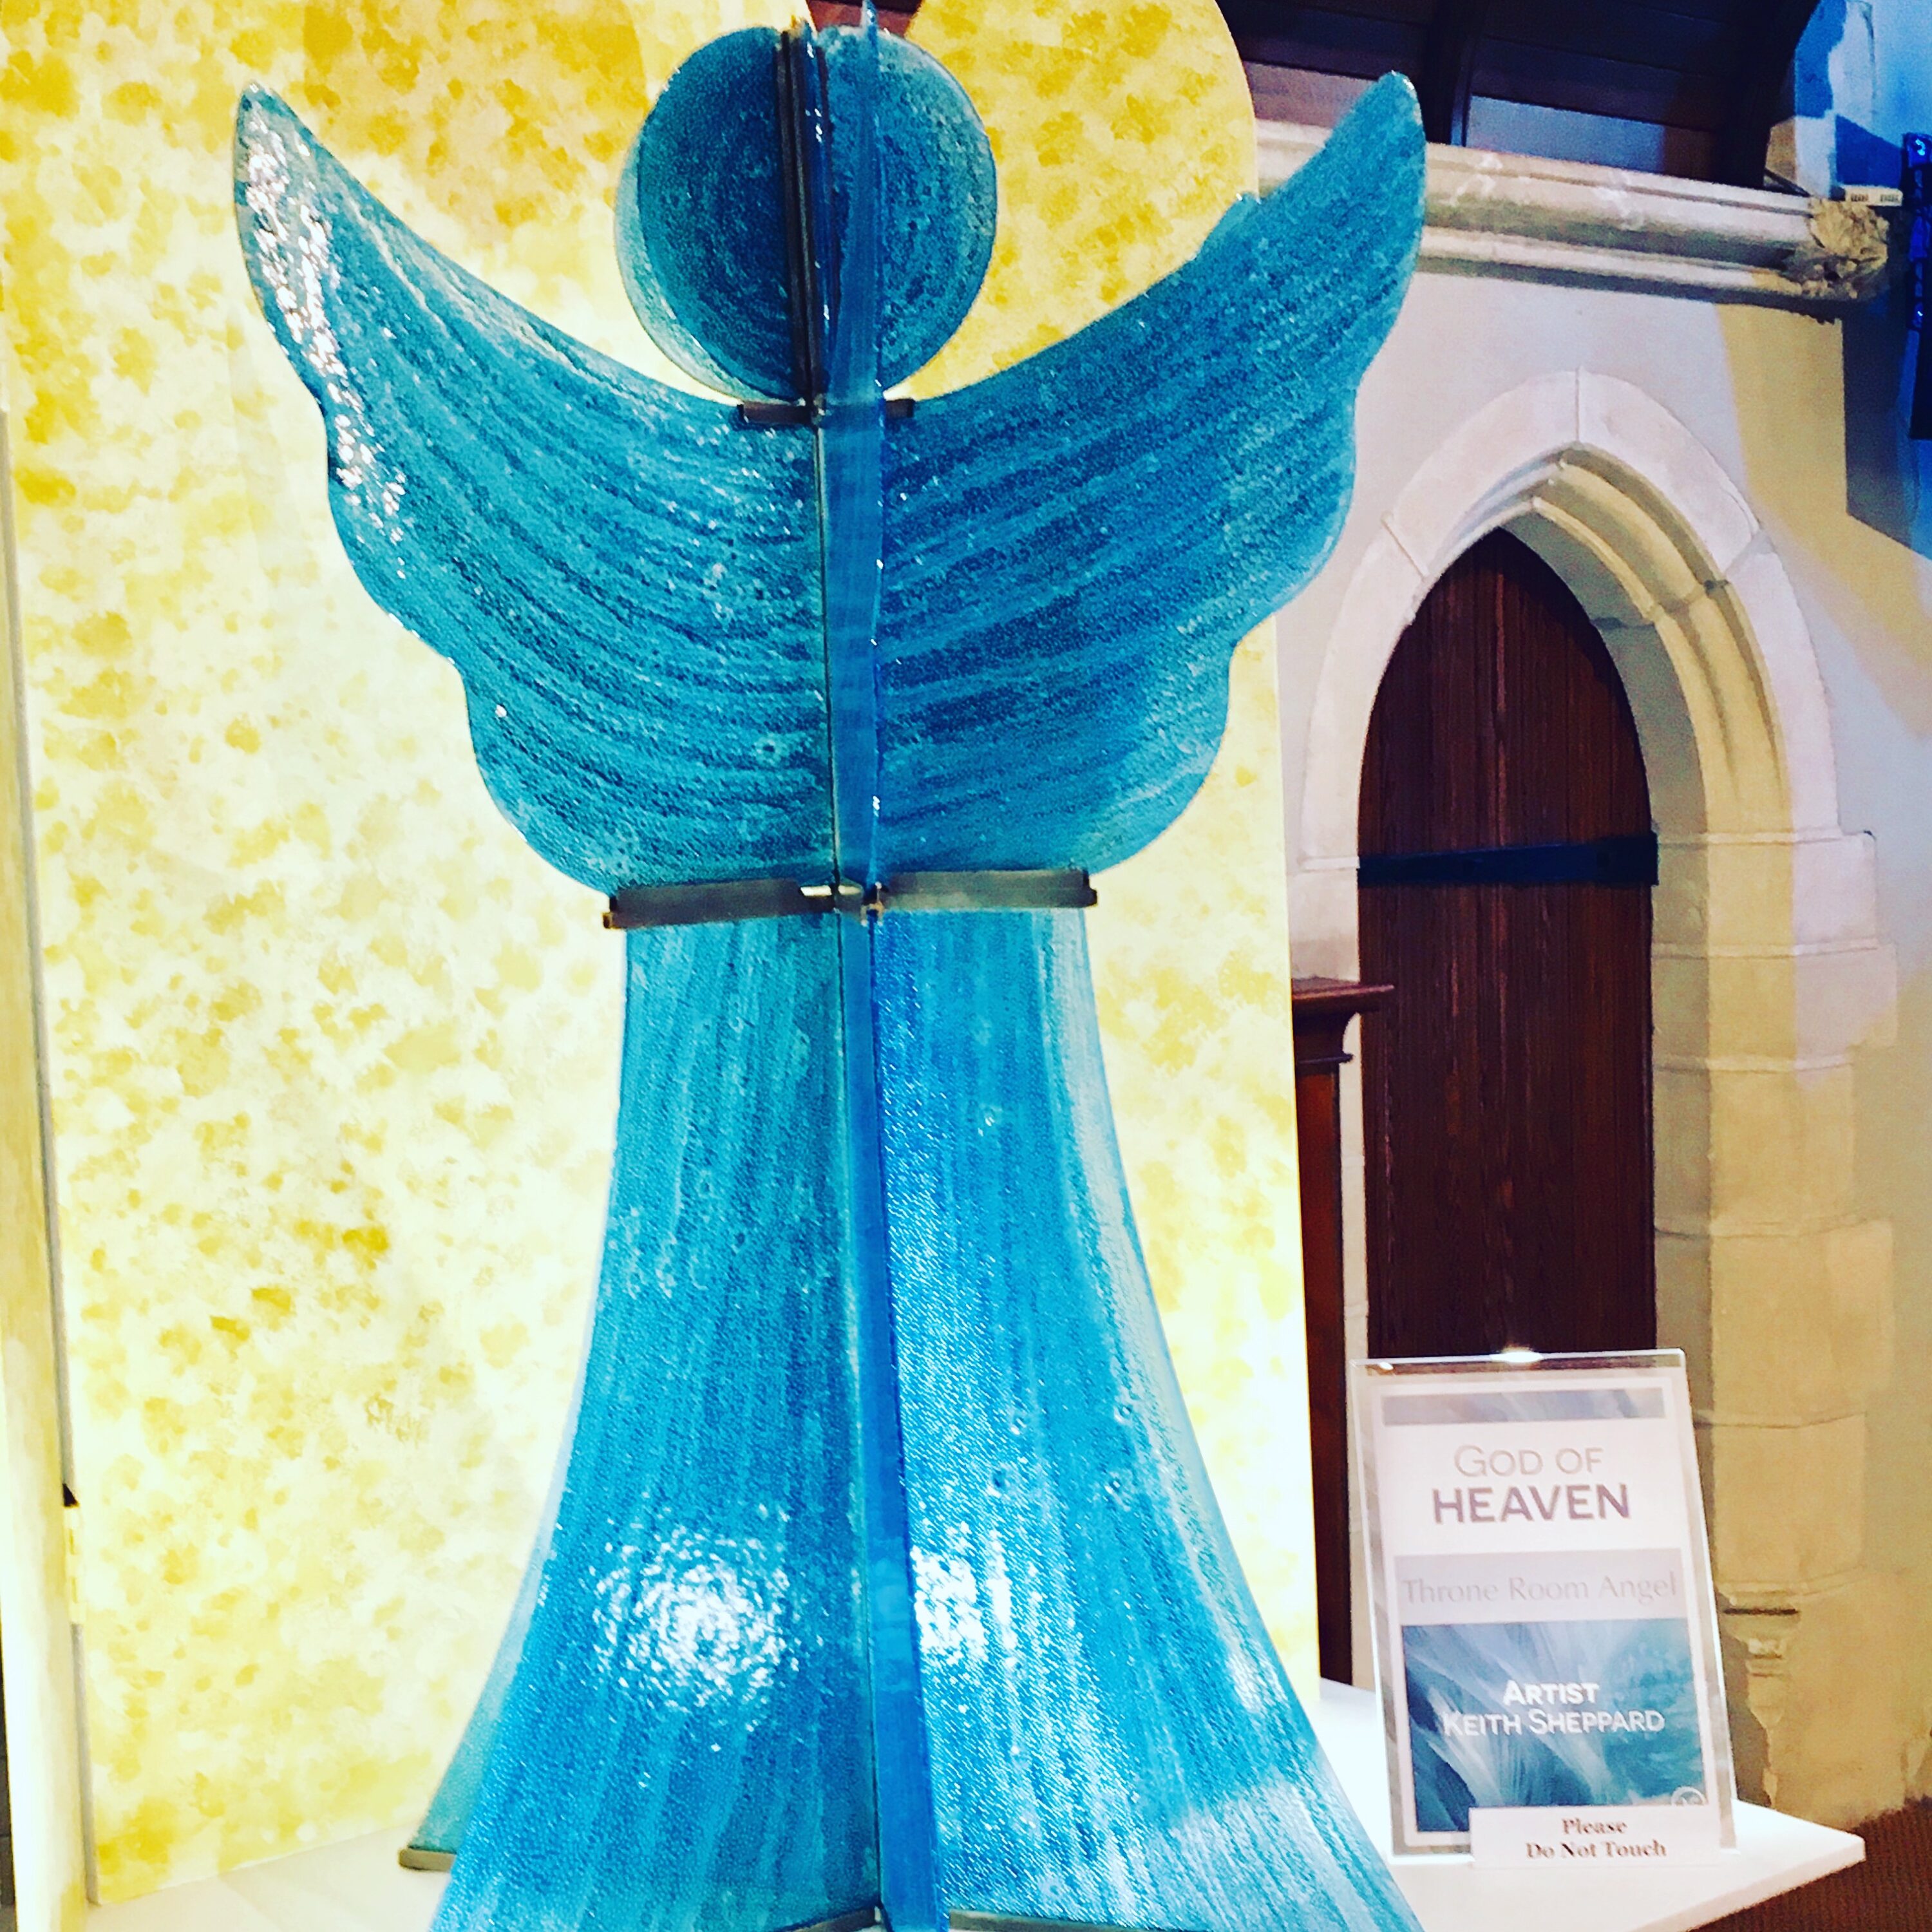 Angels Among Us glass sculpture hand made in Ireland by Keith Sheppard Glassware, County Armagh, Northern Ireland